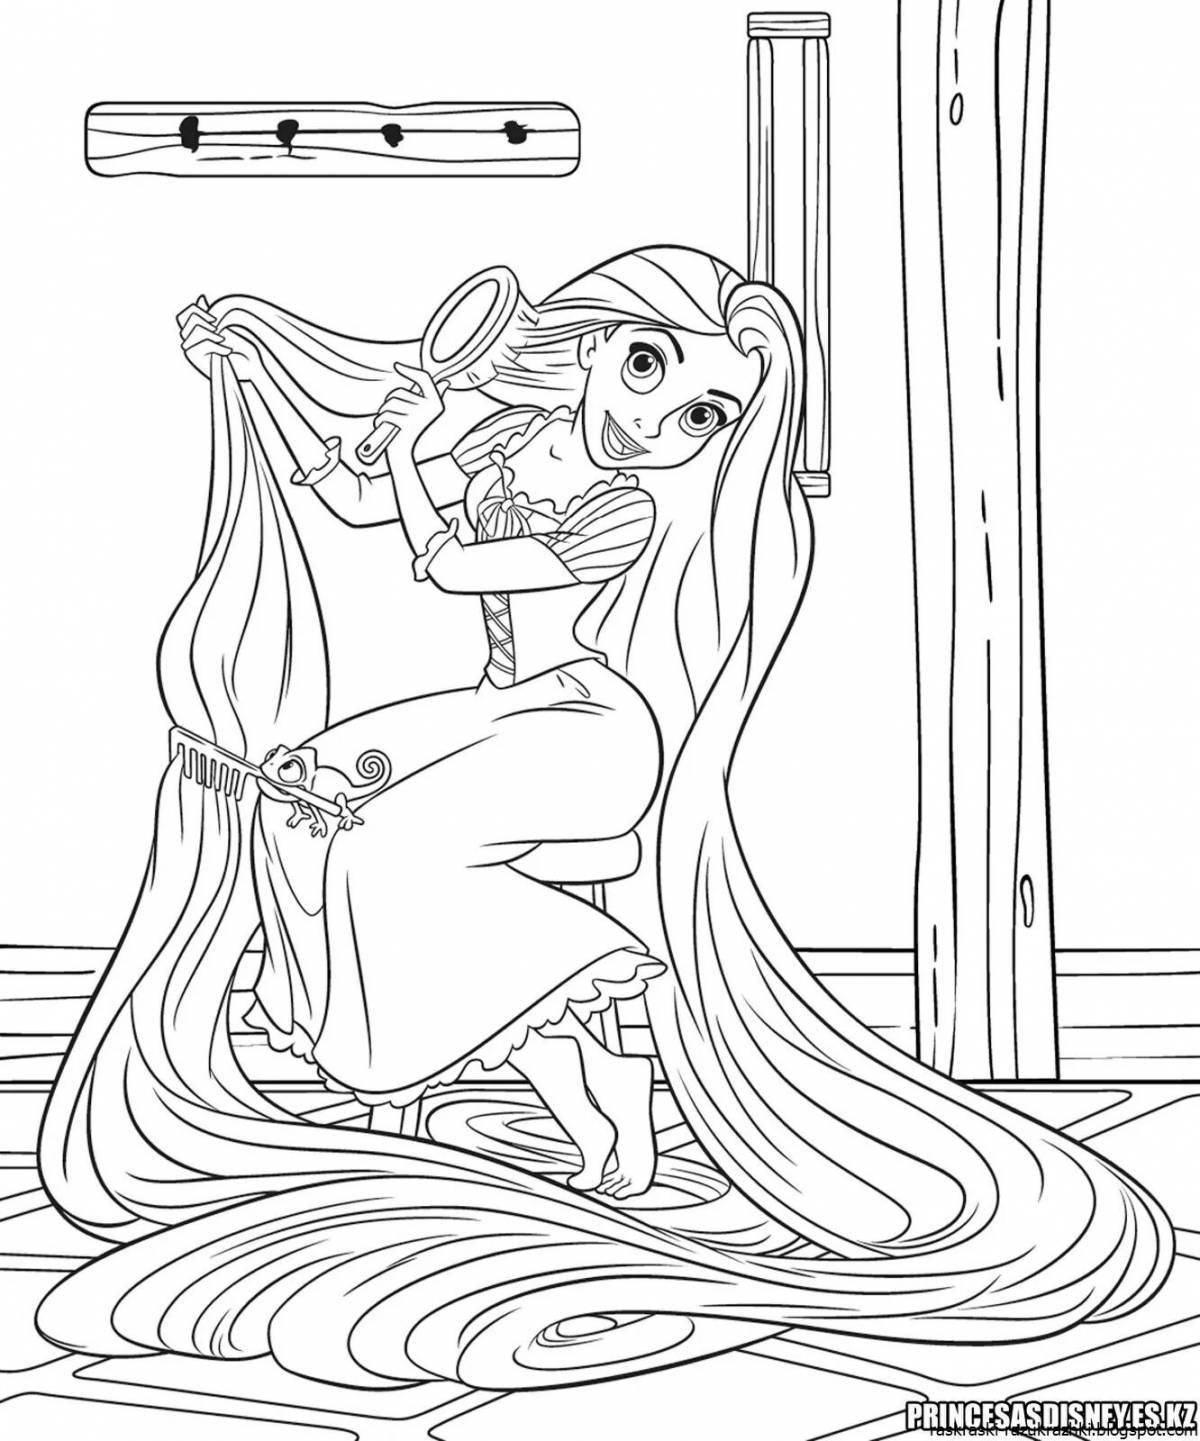 Great coloring drawing of rapunzel